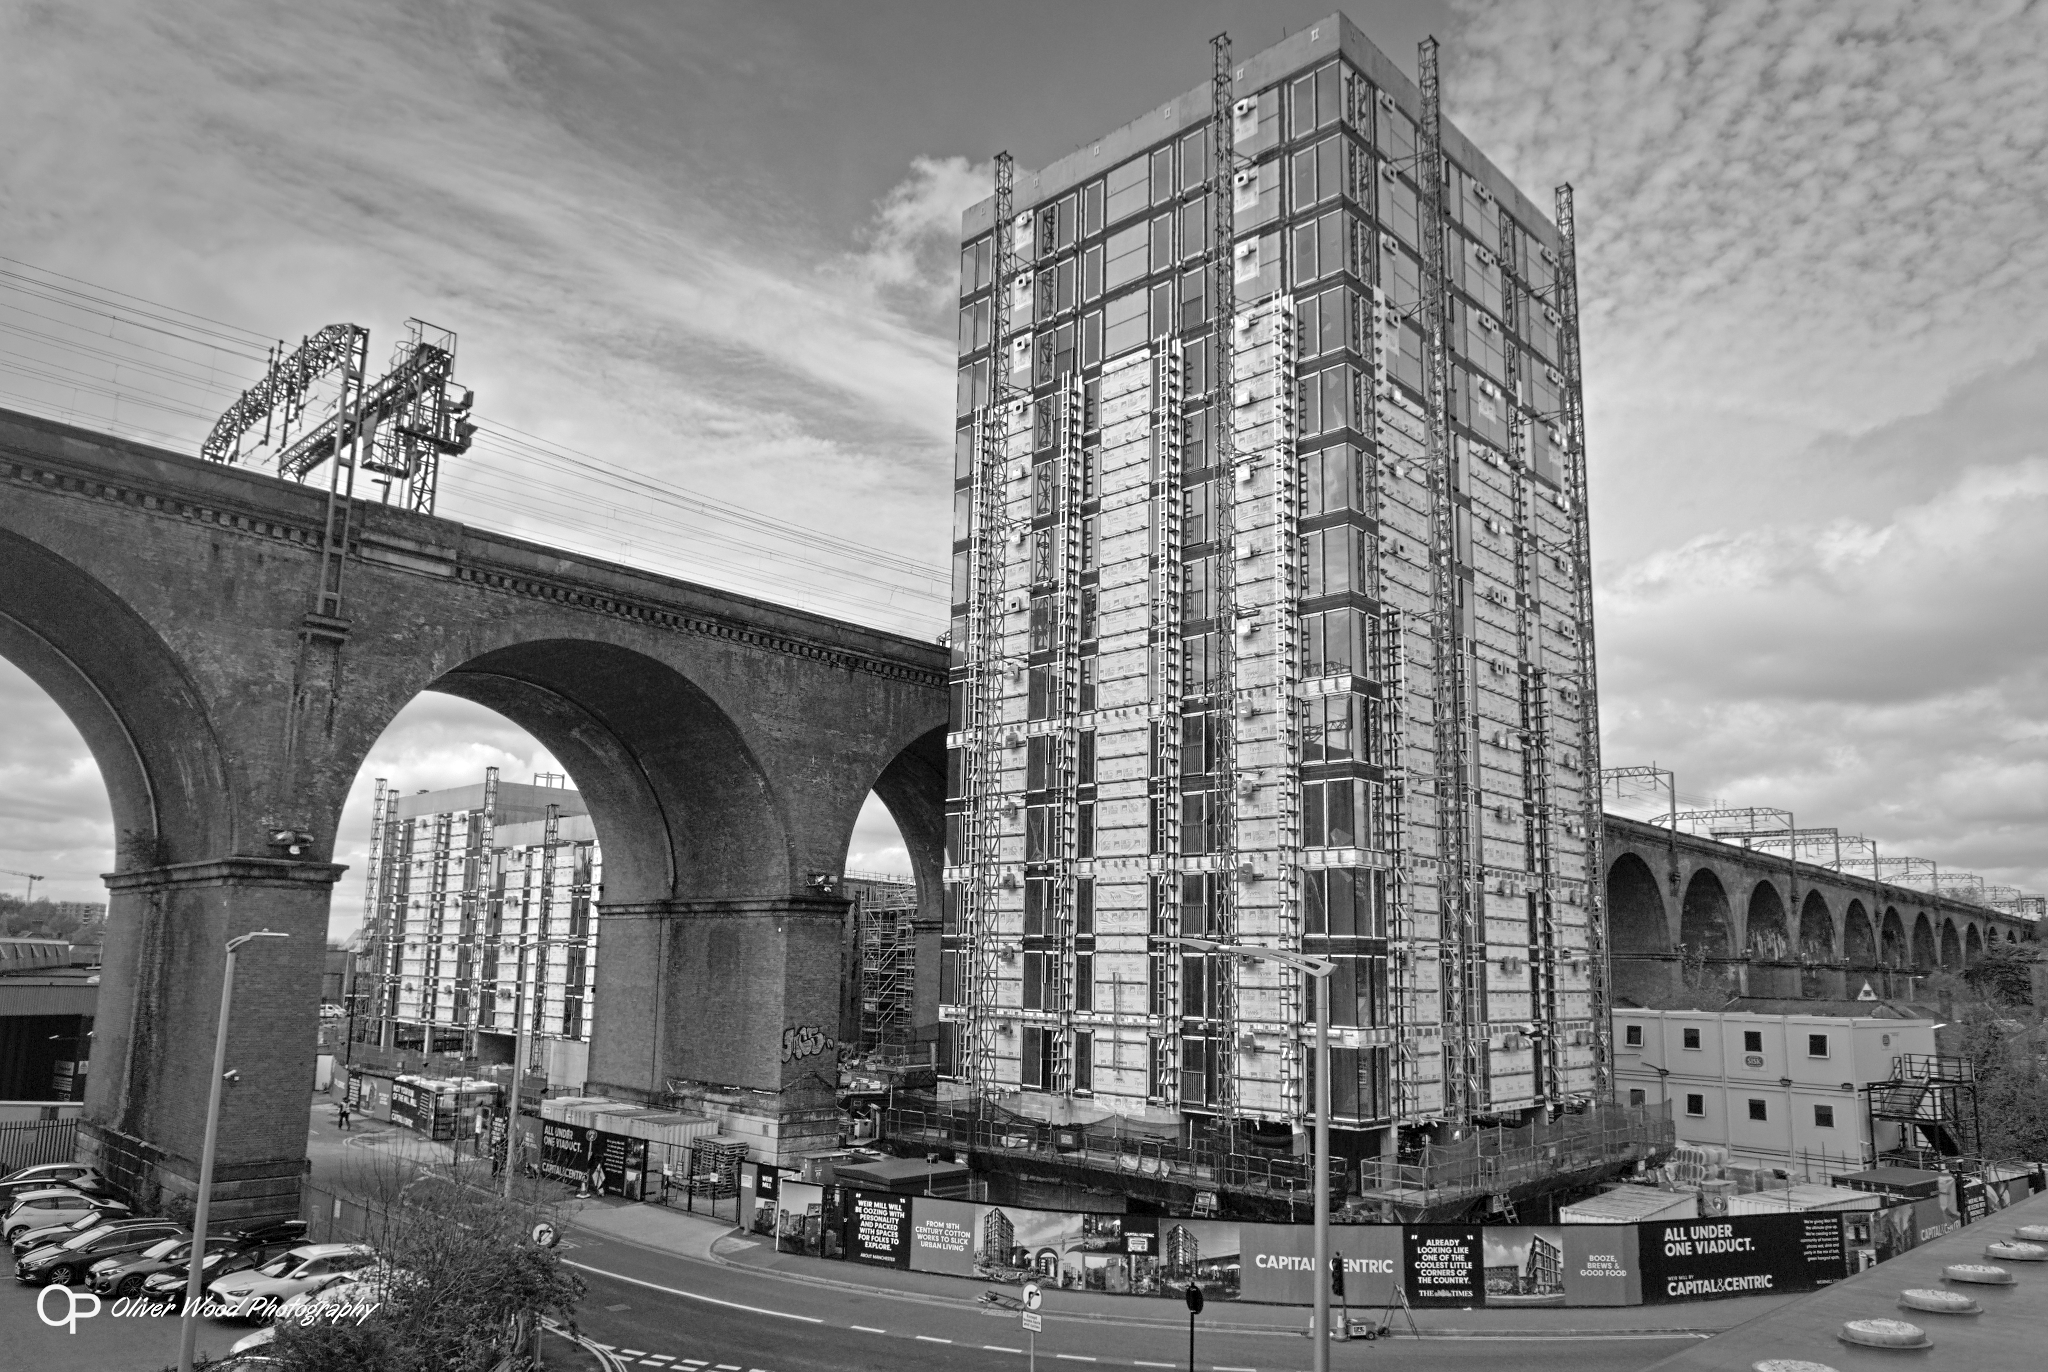 Black and white photo of new tower block and railway viaduct